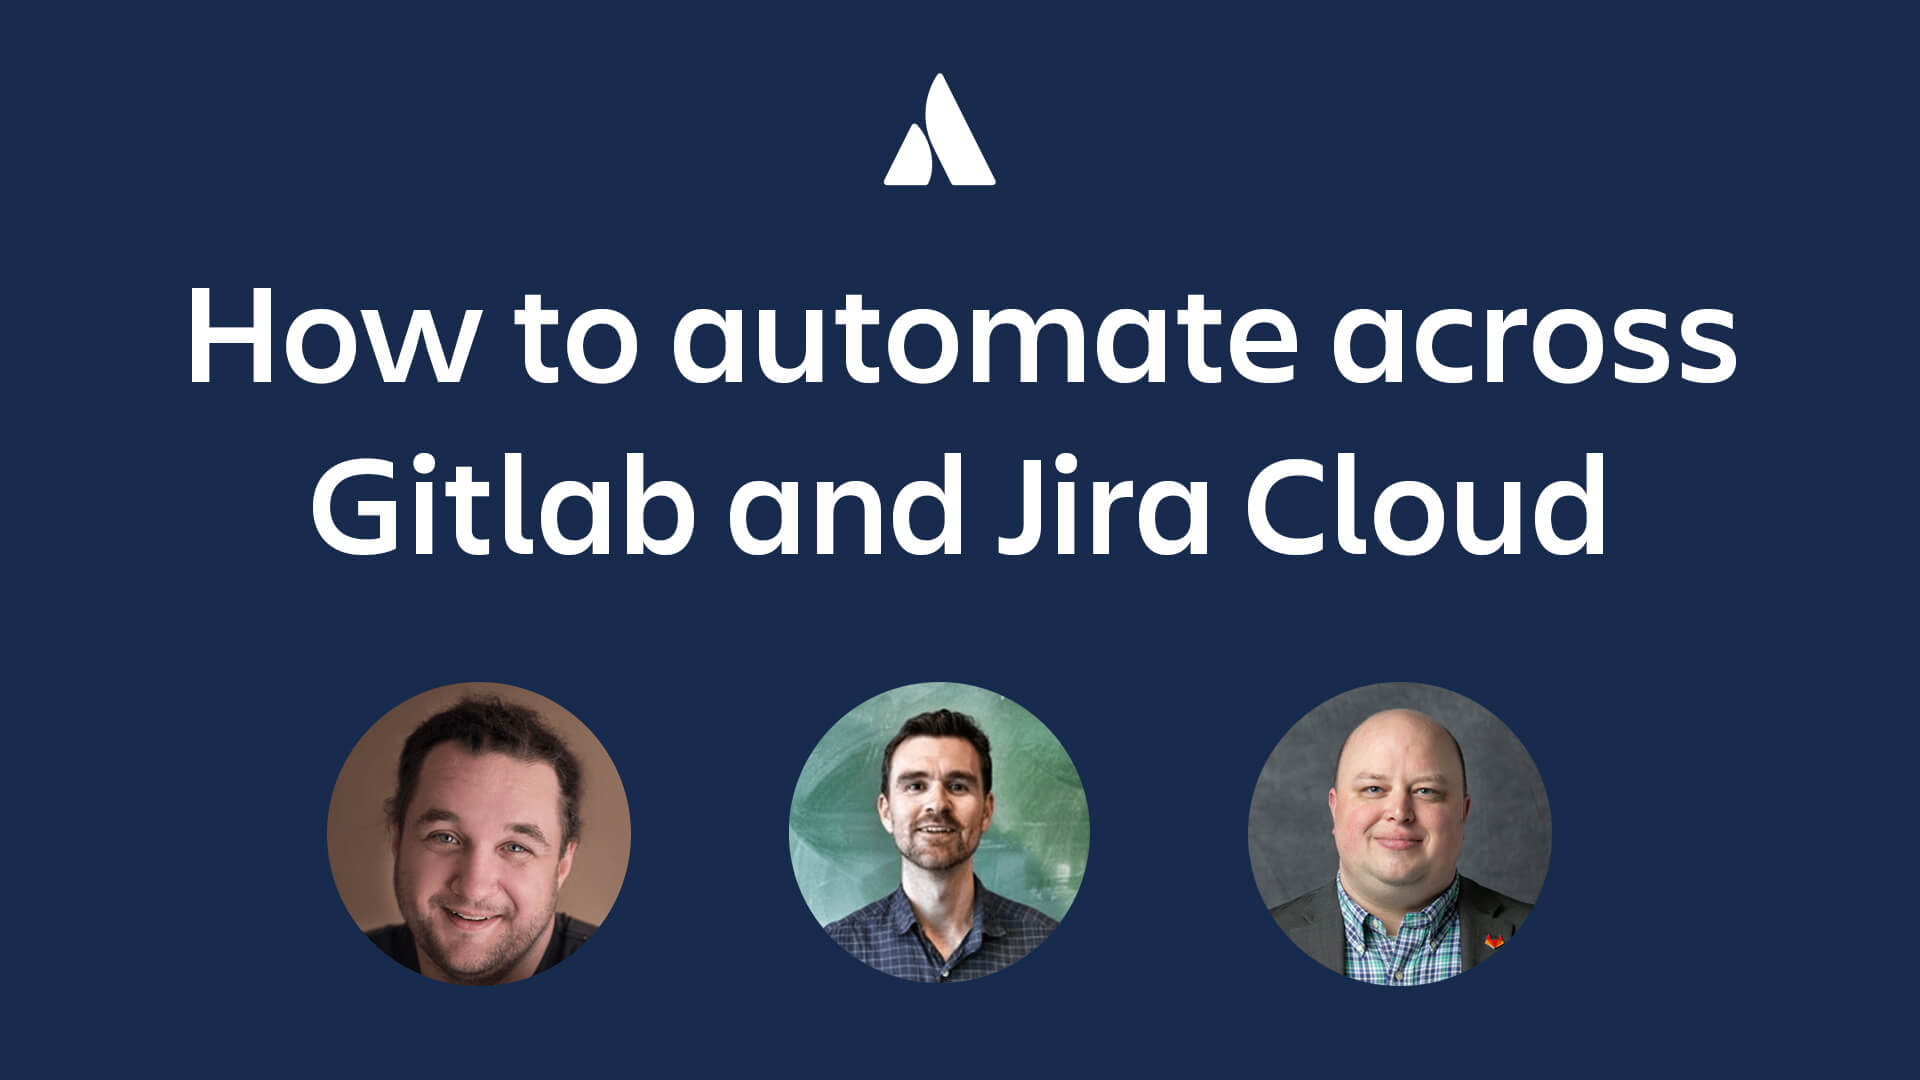 How to automate across gitlab and Jira Cloud